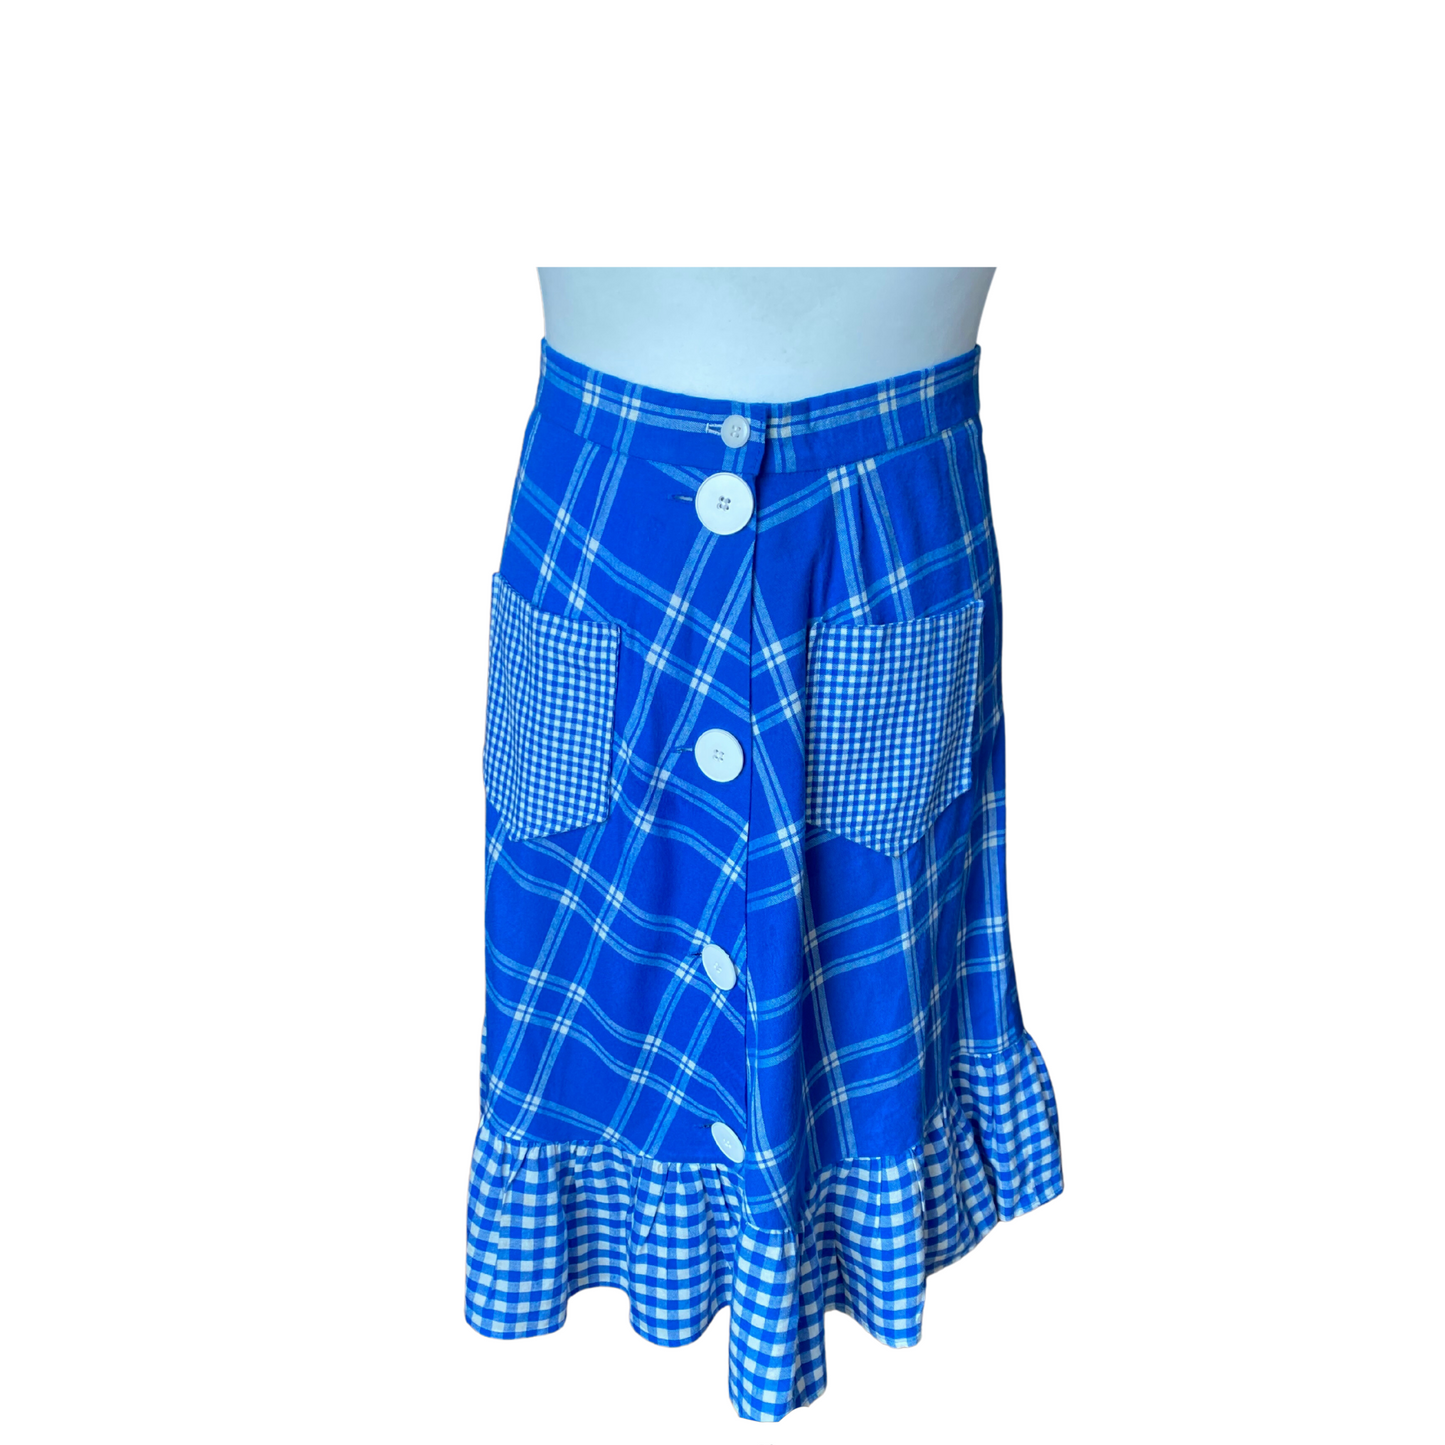 Blue and white checked vintage skirt with gingham pockets and hem frill. Large white button down front. 